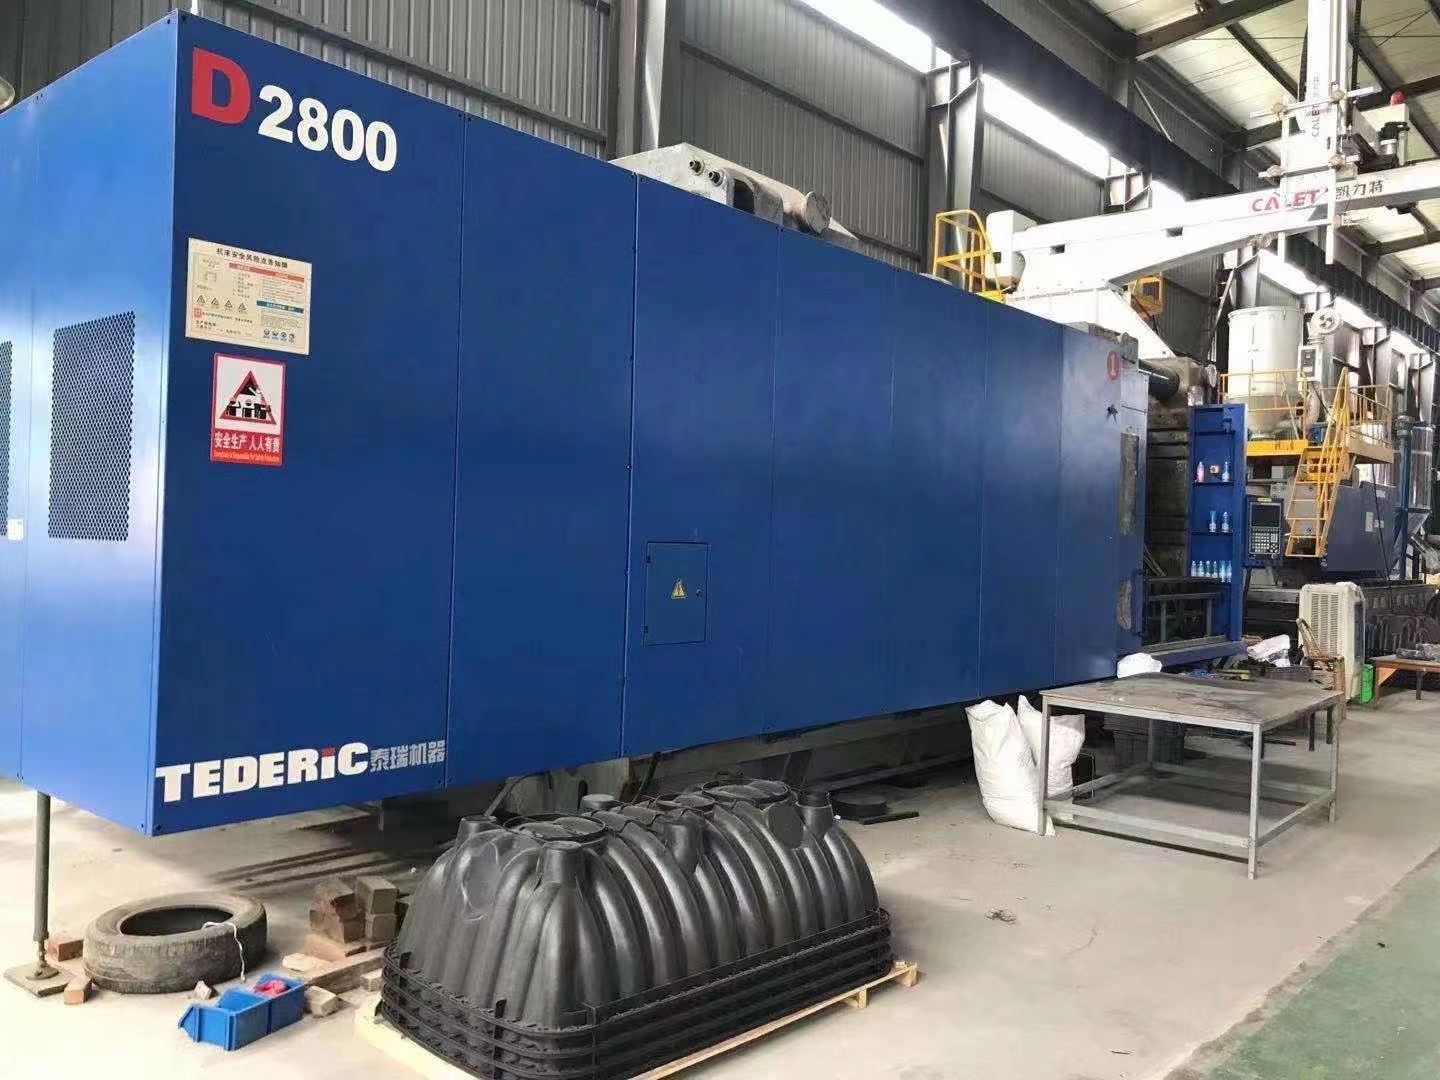 2800 tons injection machine arrived